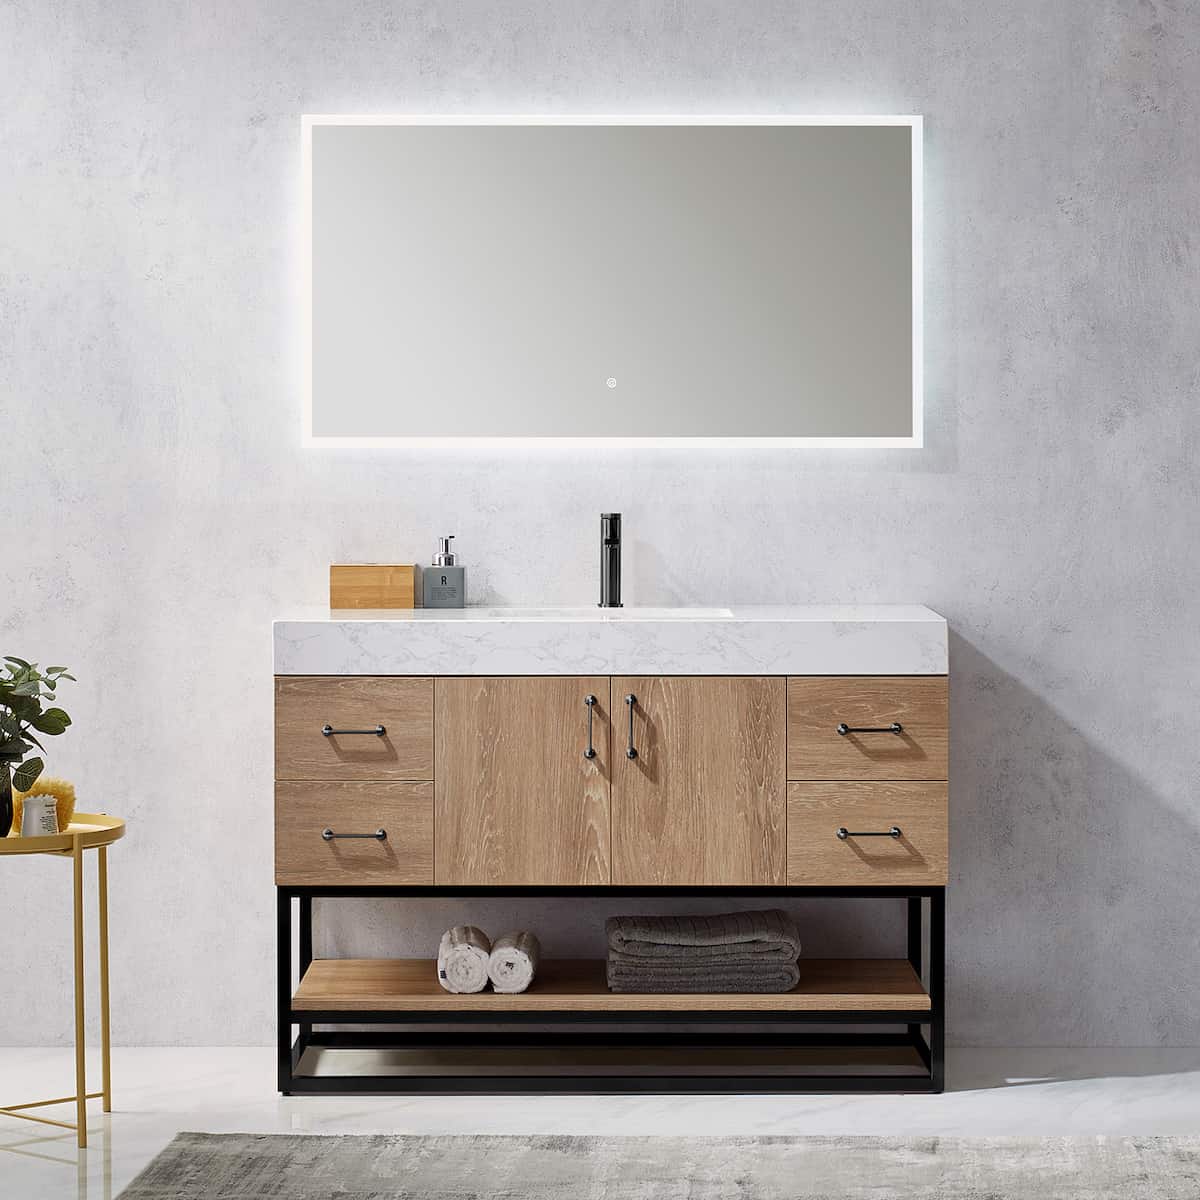 Vinnova Alistair 48 Inch Freestanding Single Vanity in North American Oak and Matte Black Frame with White Grain Stone Countertop With Mirror in Bathroom 789048B-NO-GW